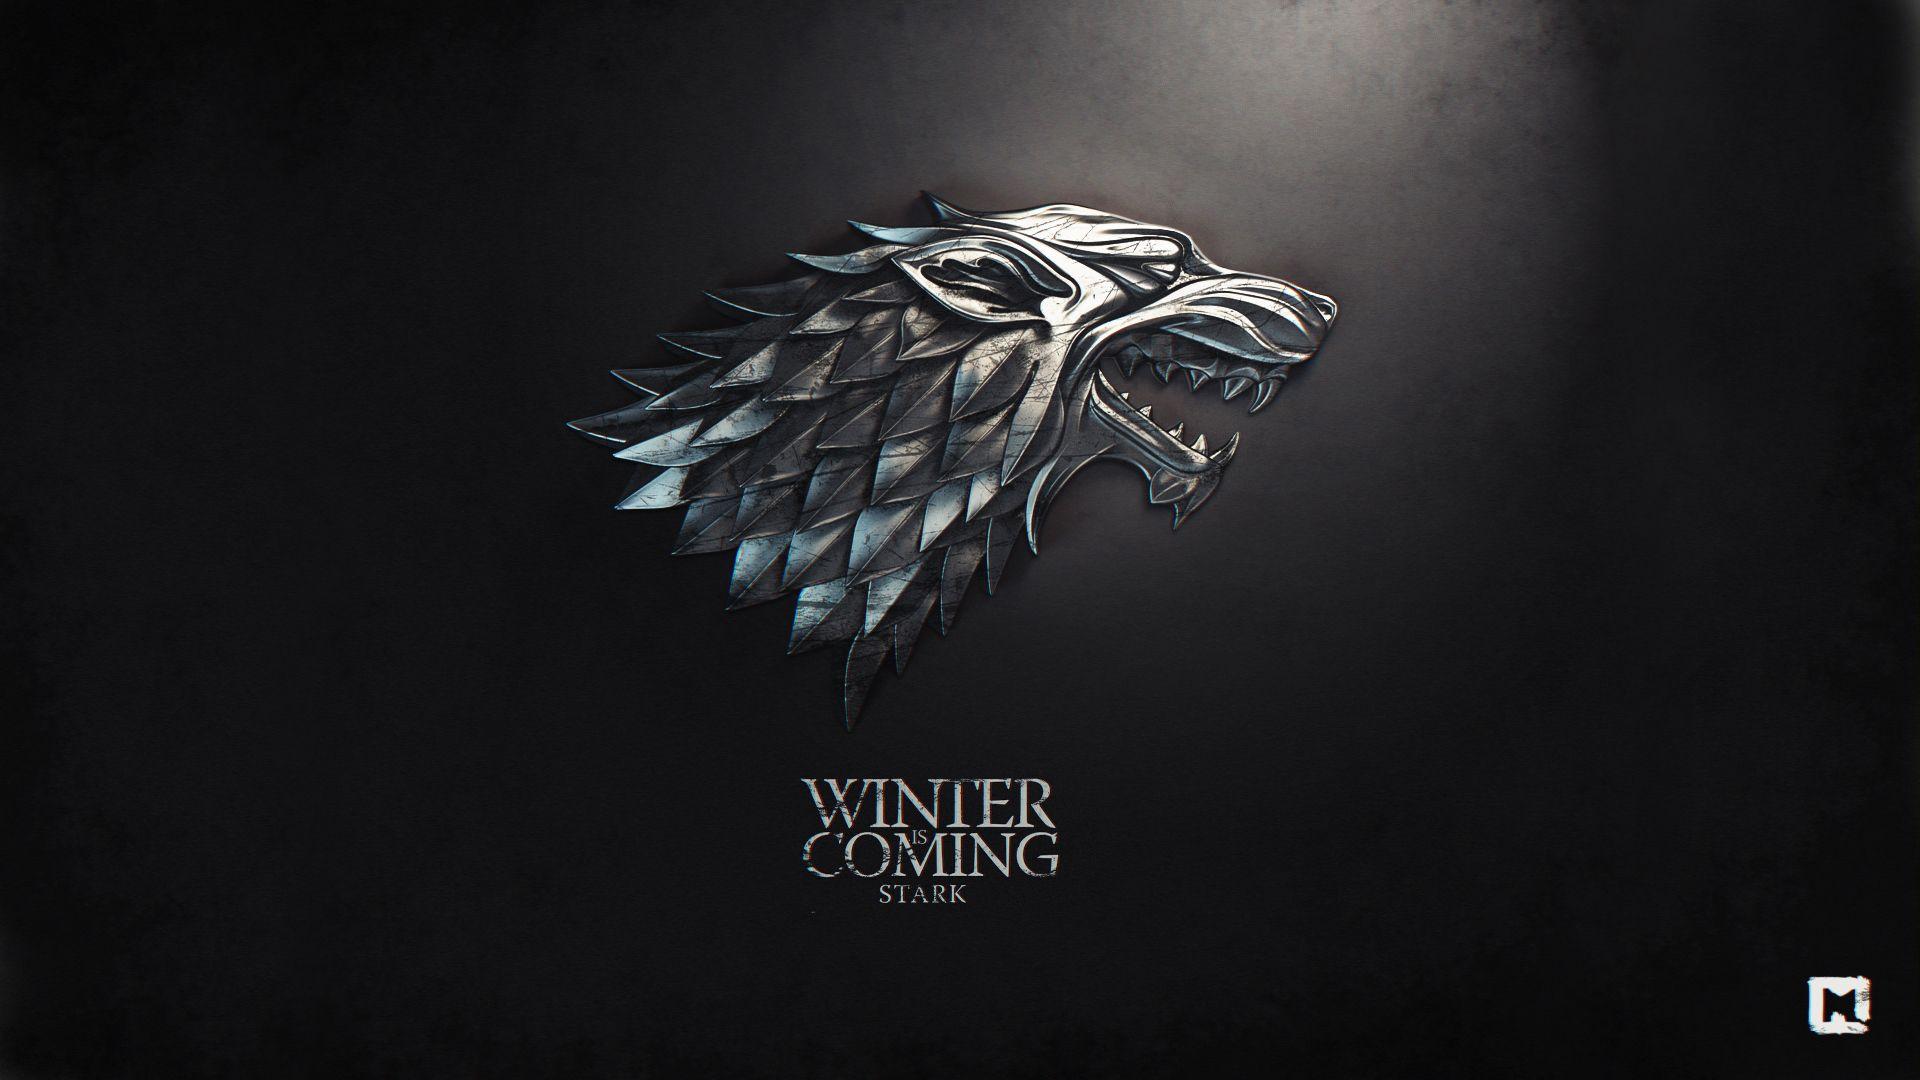 Powerful Game of Thrones wallpaper. Game of thrones winter